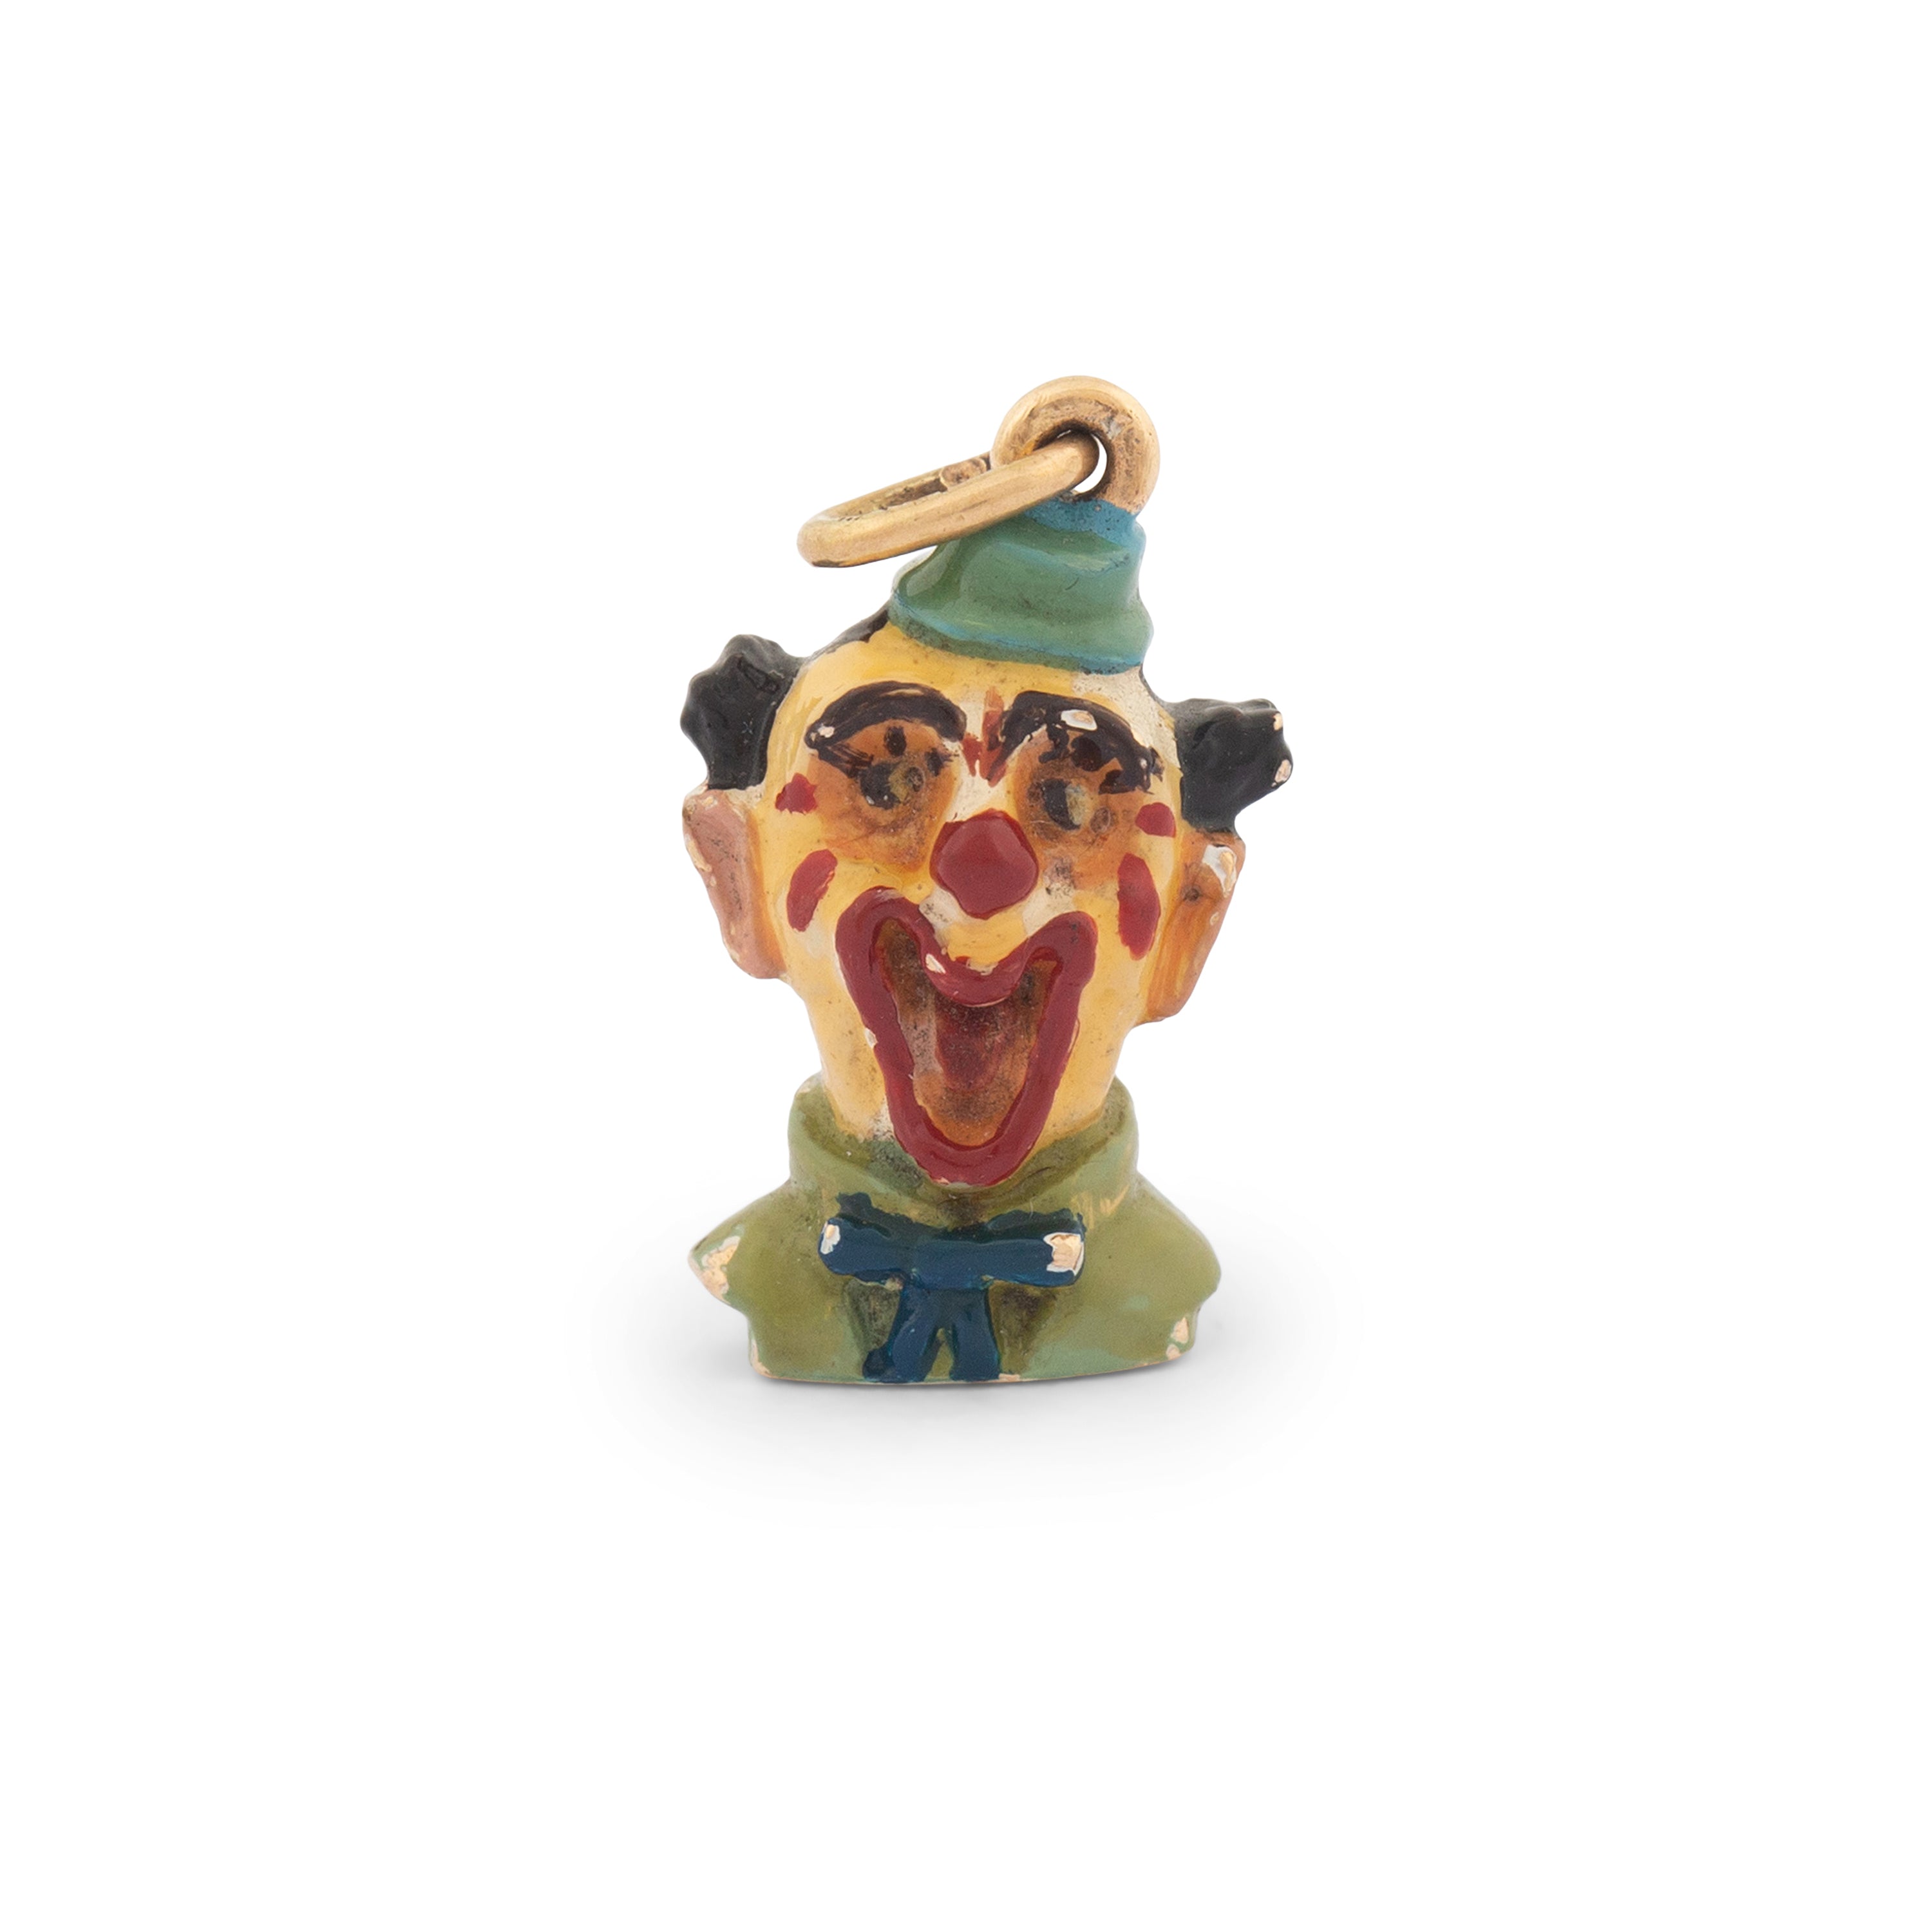 Laughing Clown 14k Gold And Enamel Charm